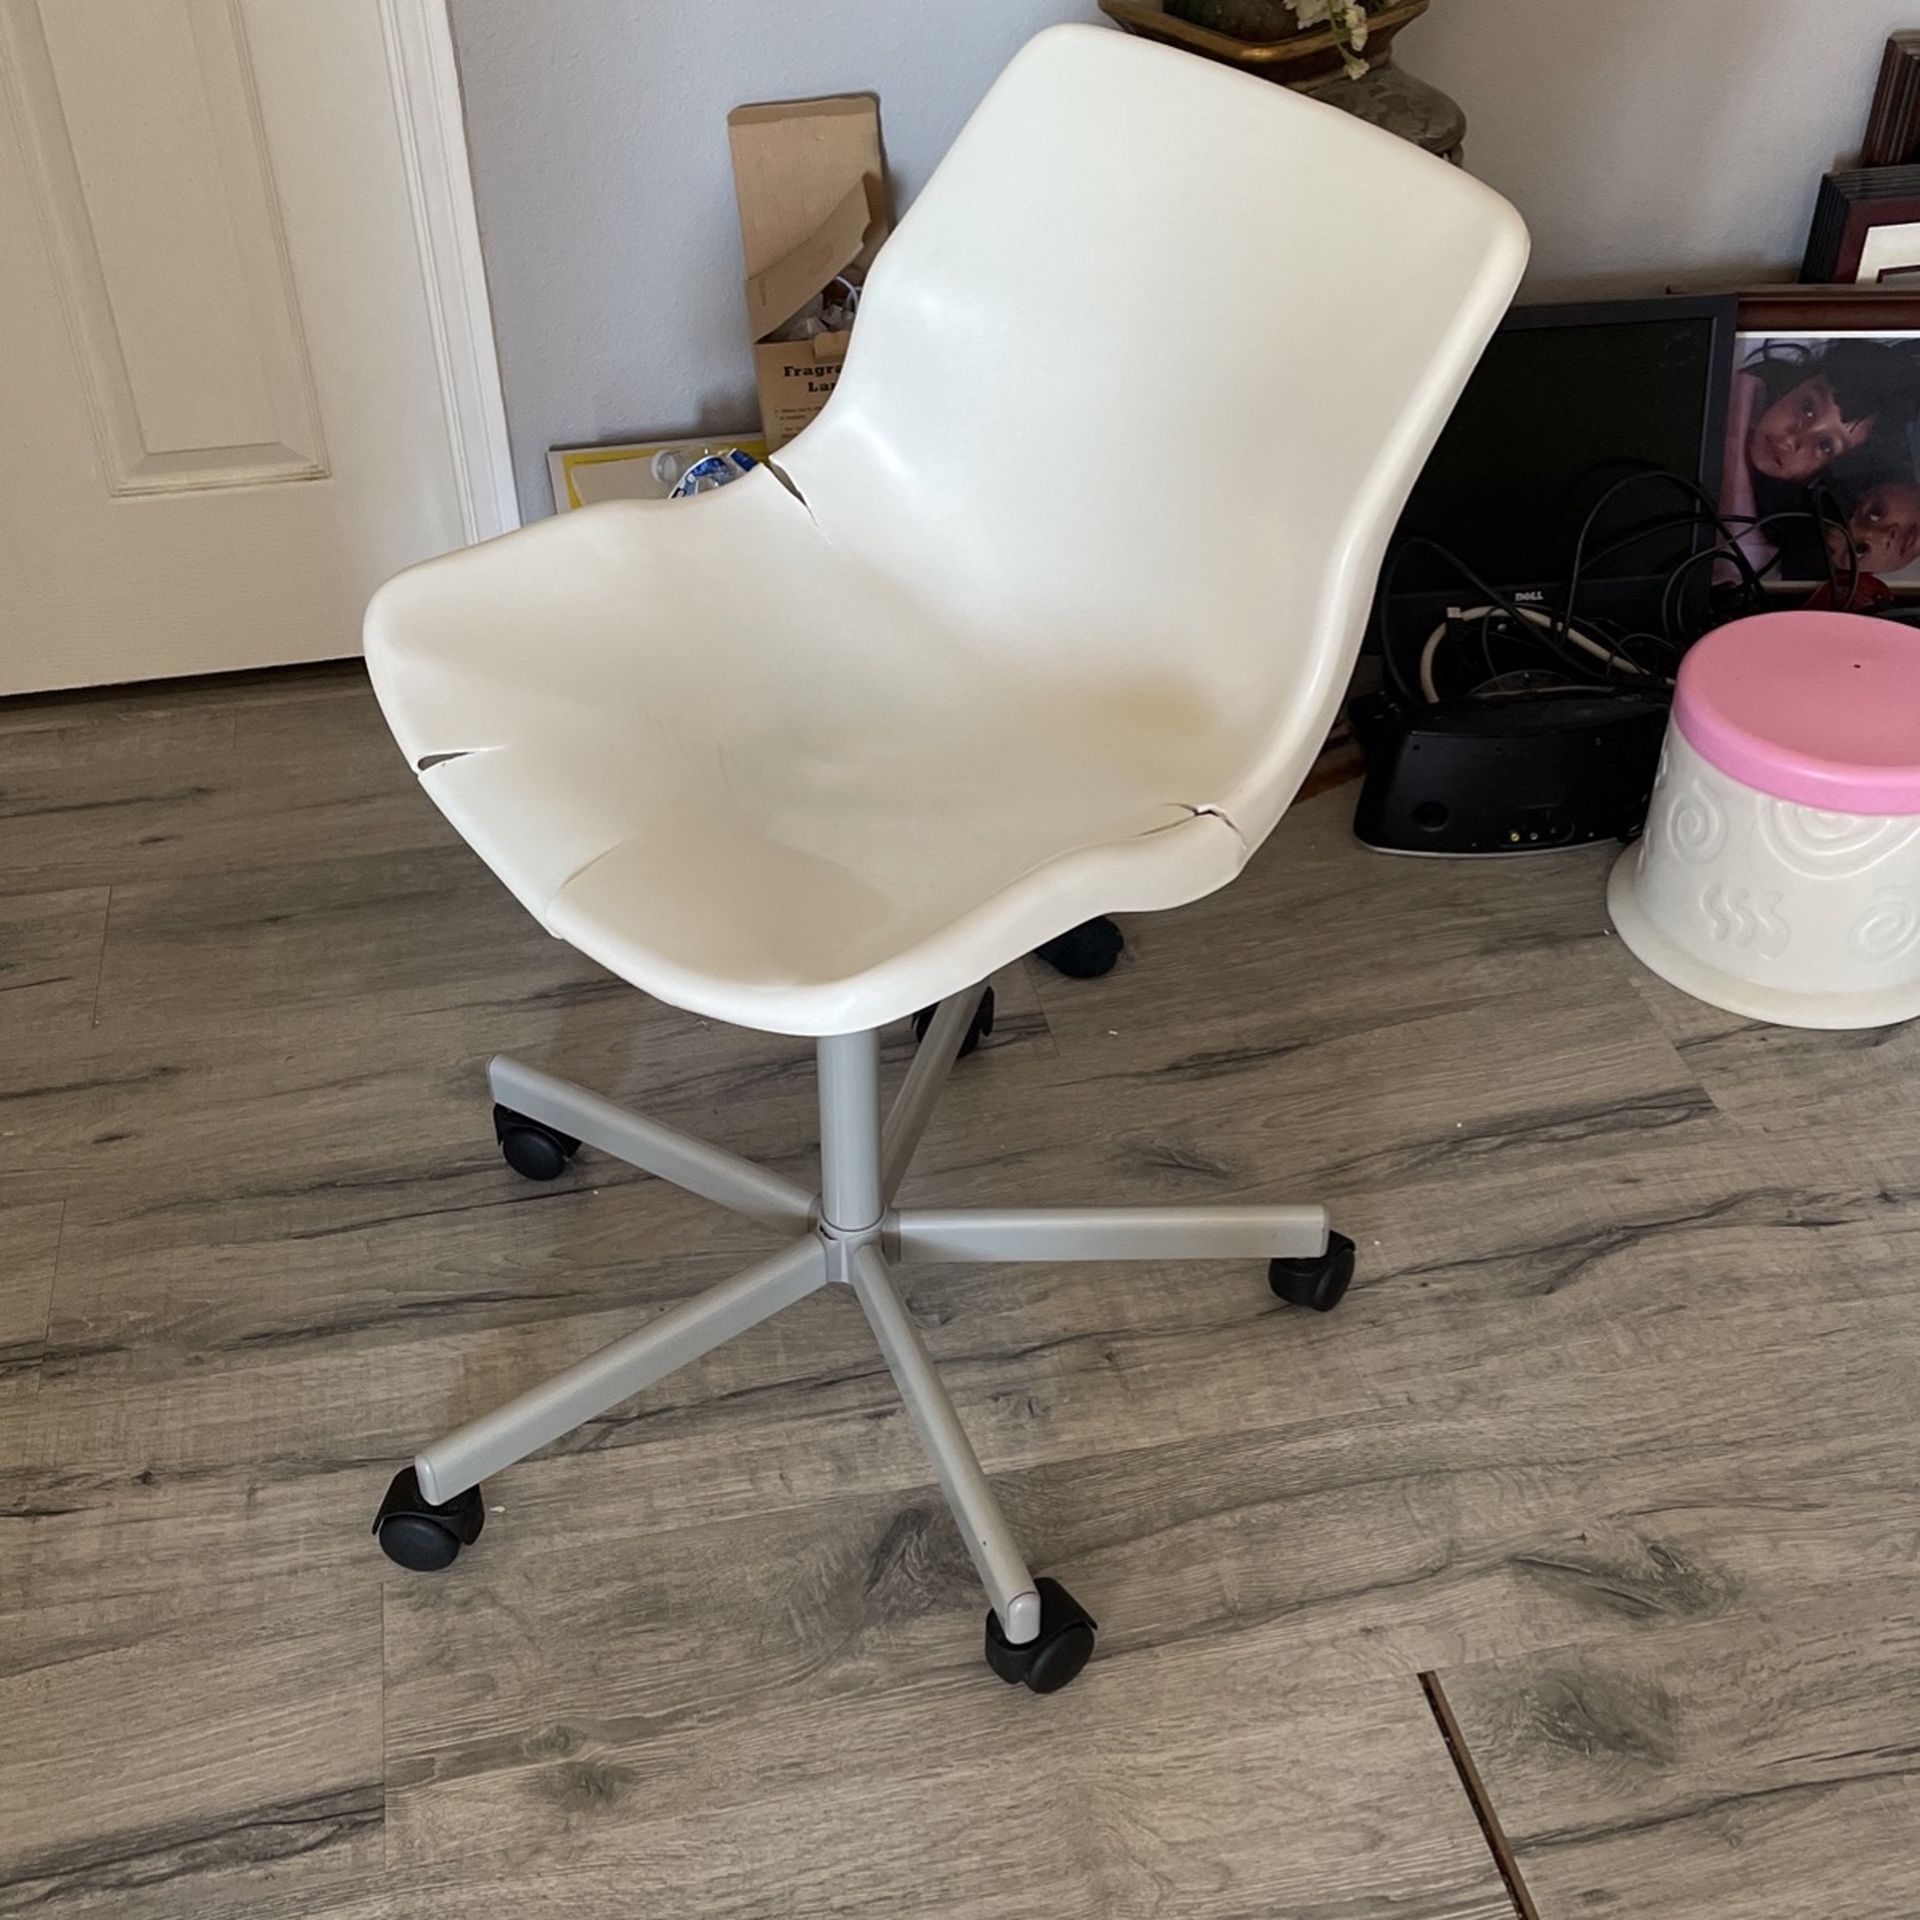 Used Rolling Chair